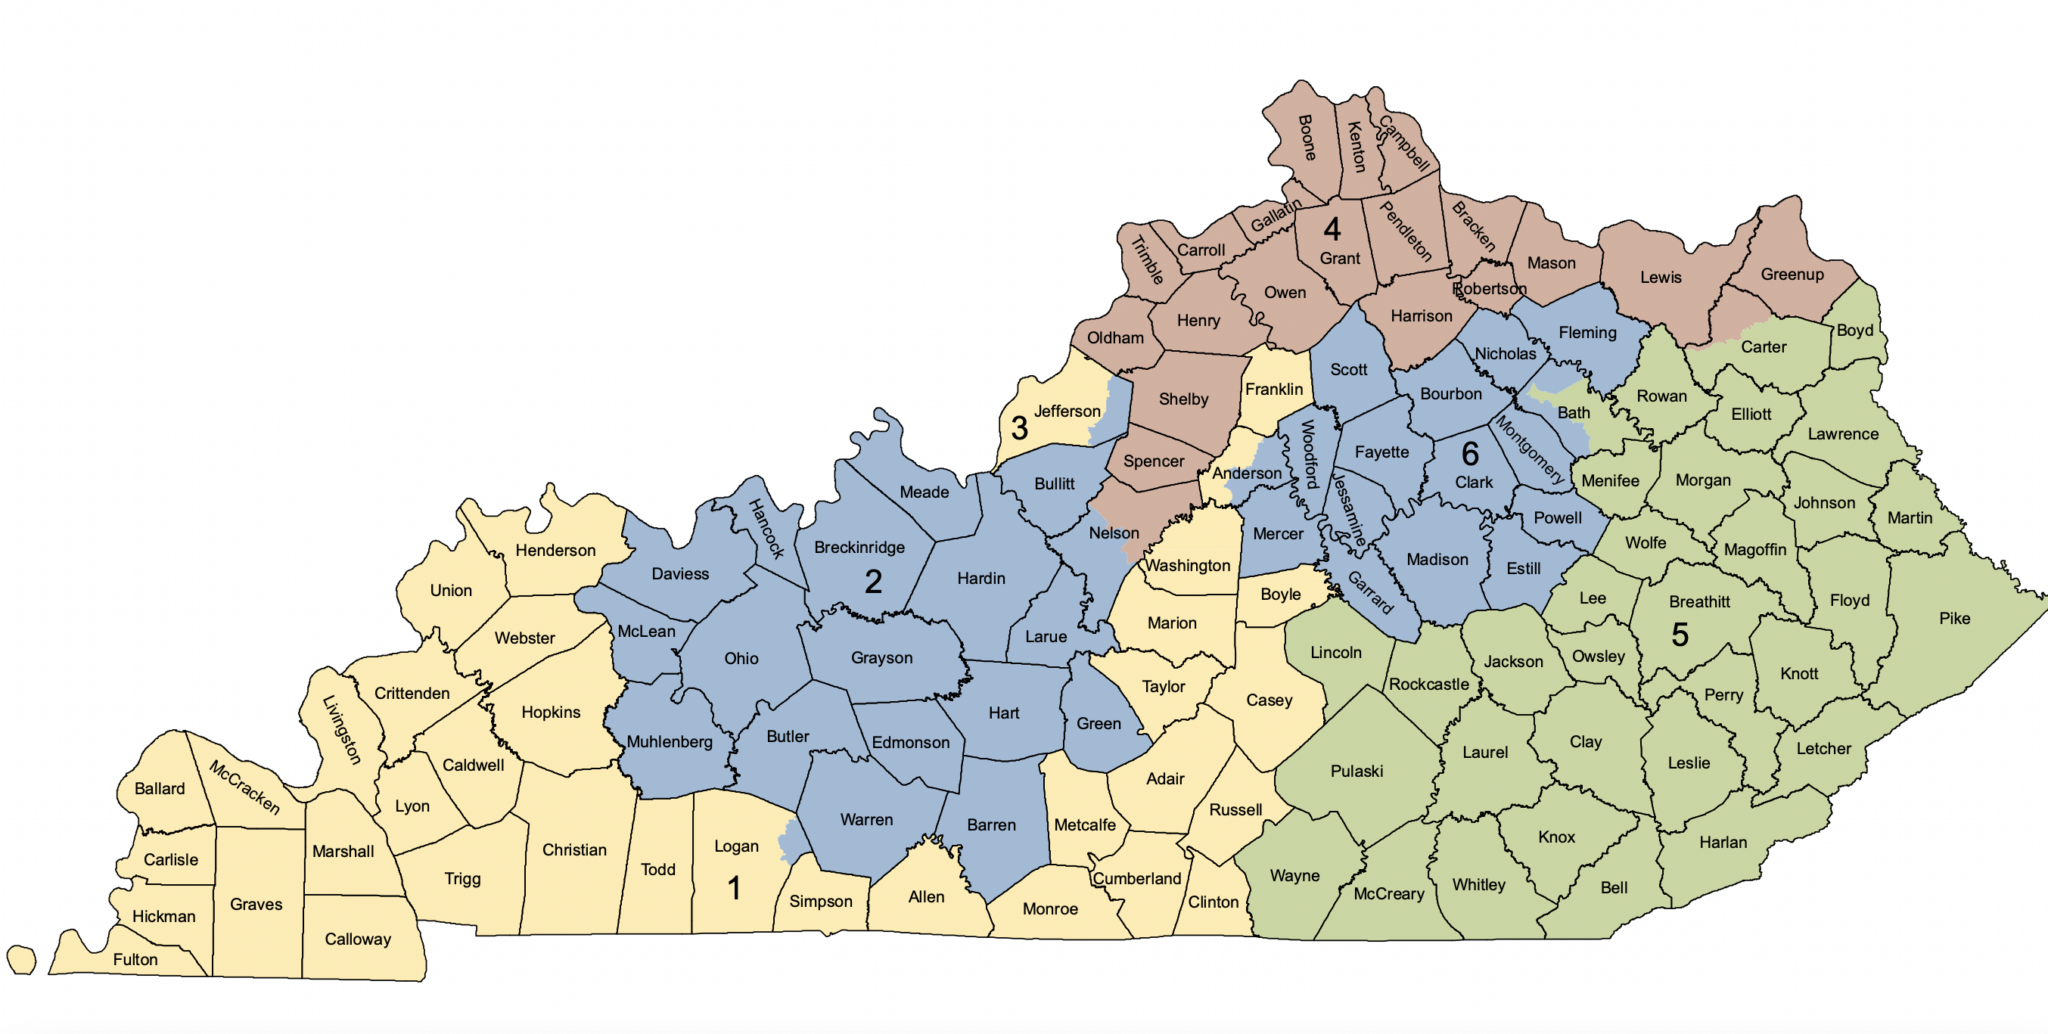 Beshear calls for constitutional amendment, as KY Supreme Court rules on gerrymandering